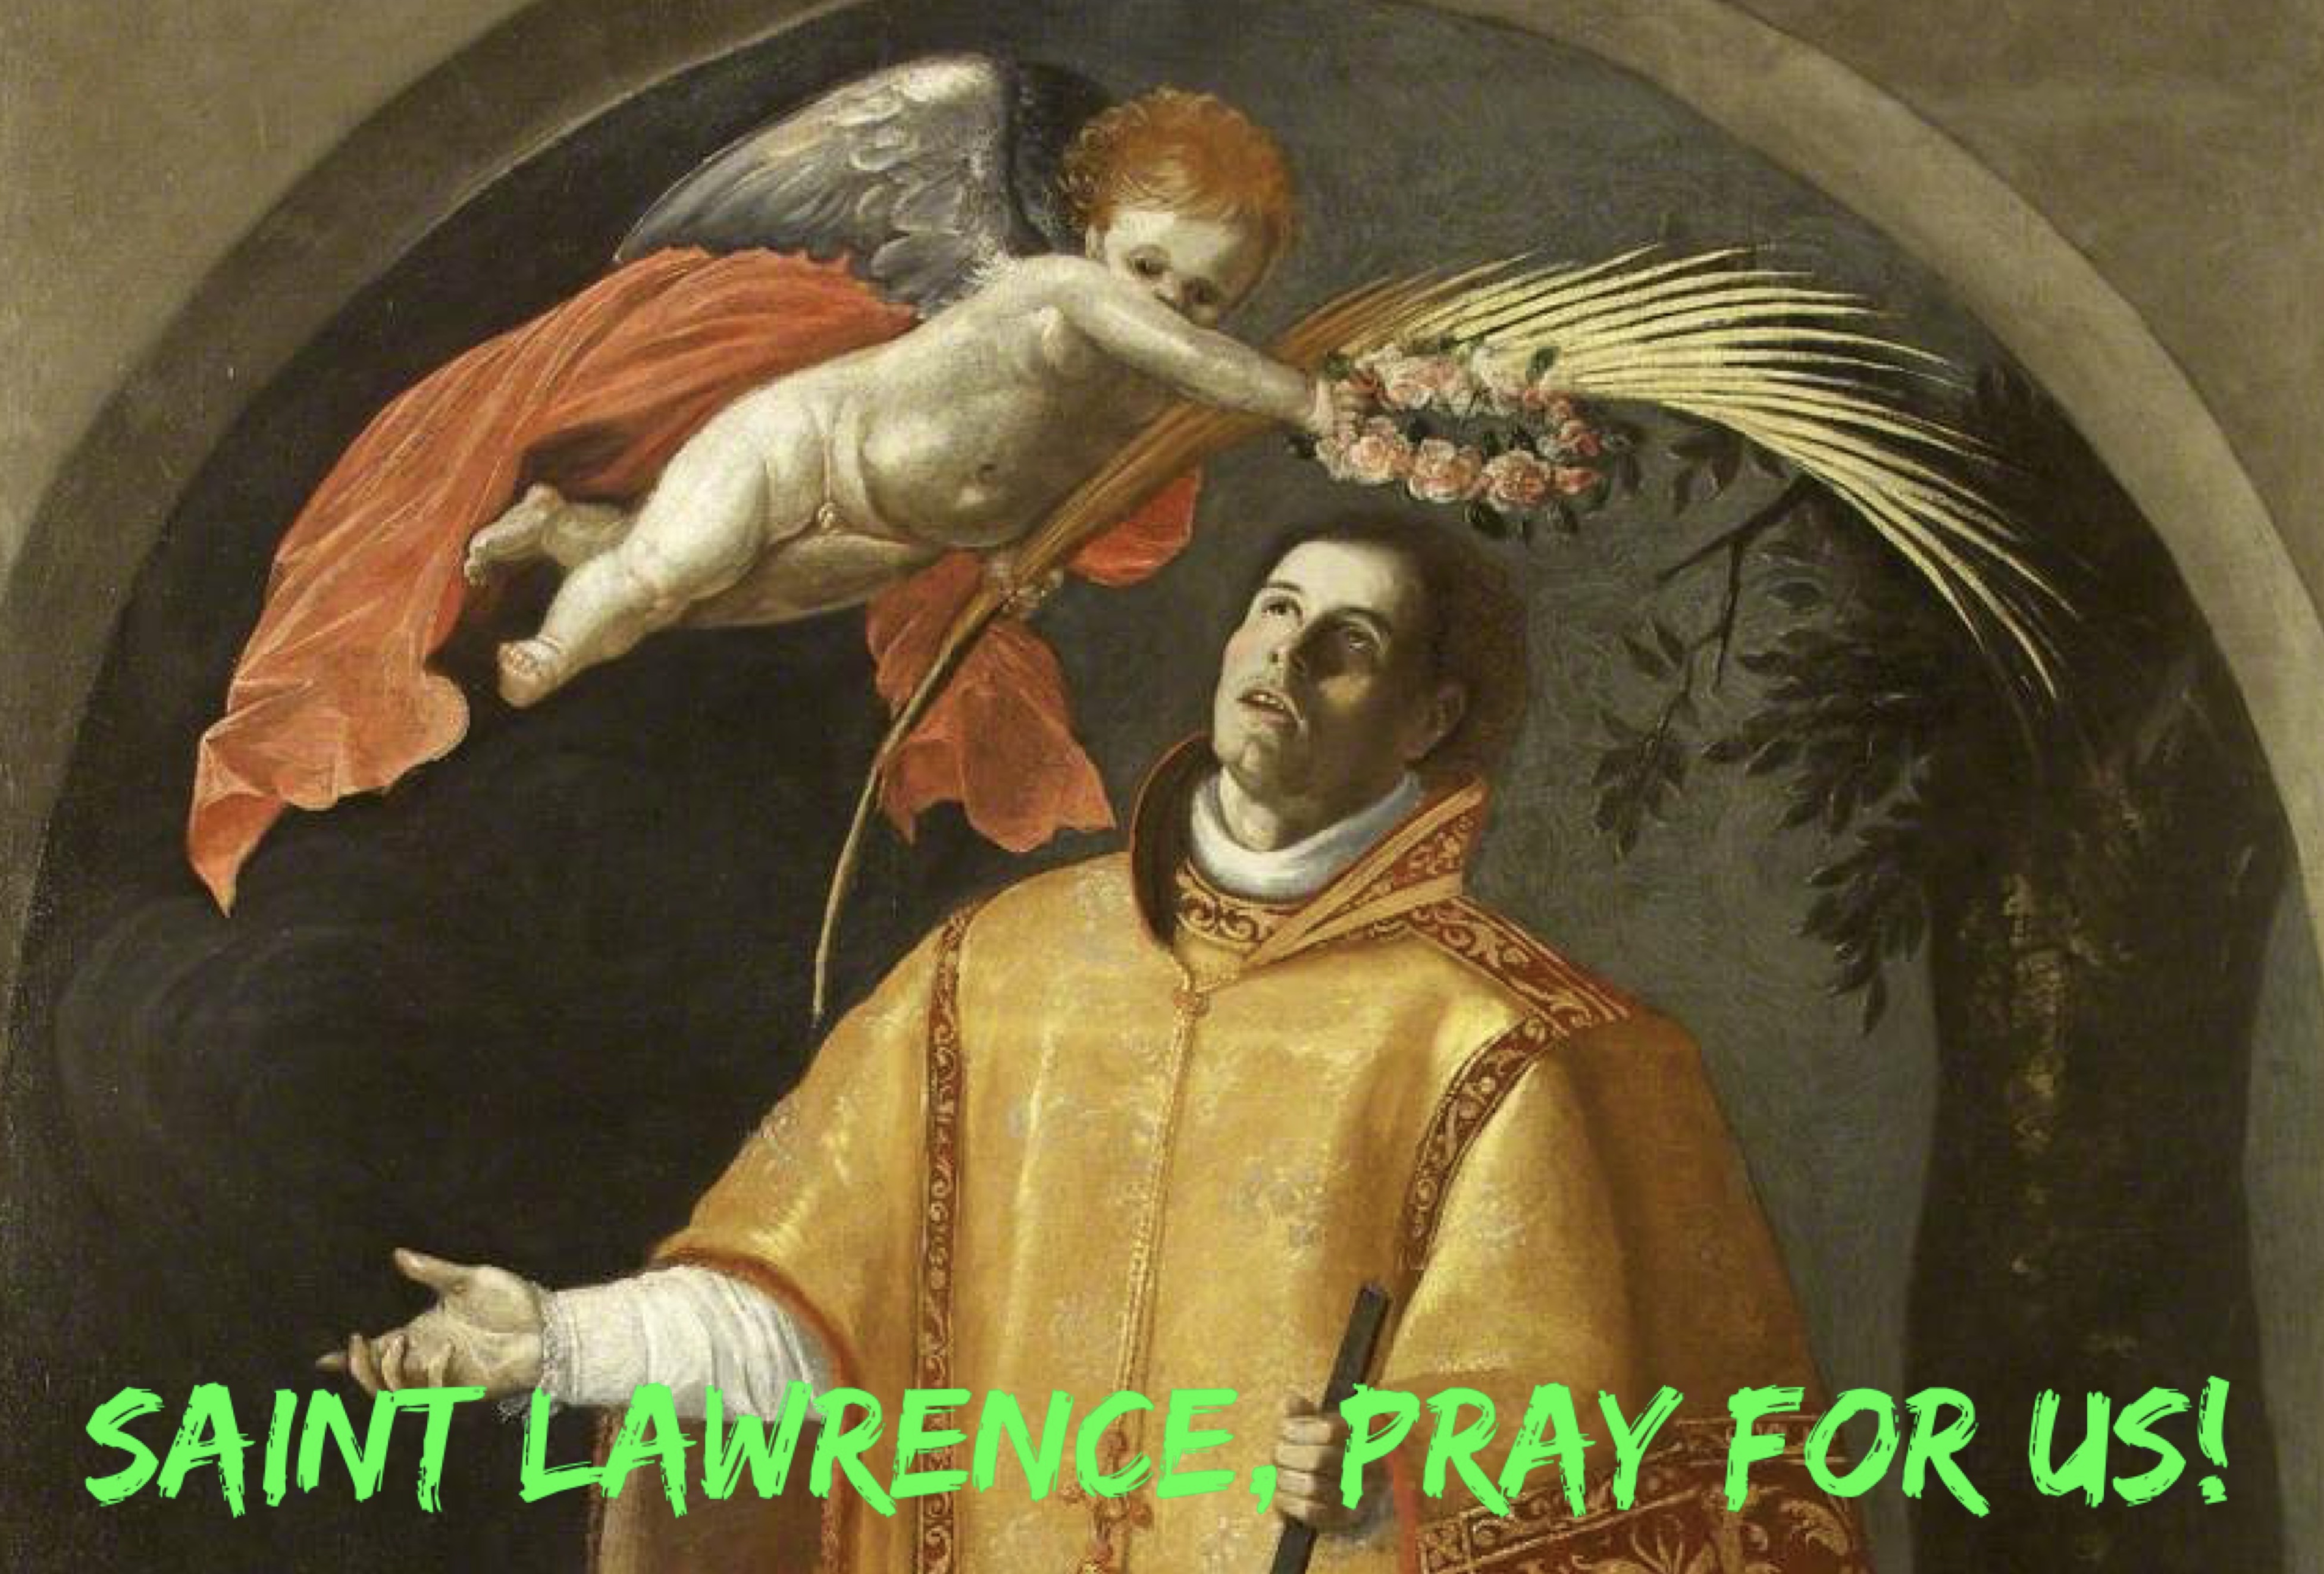 10th August - Saint Lawrence